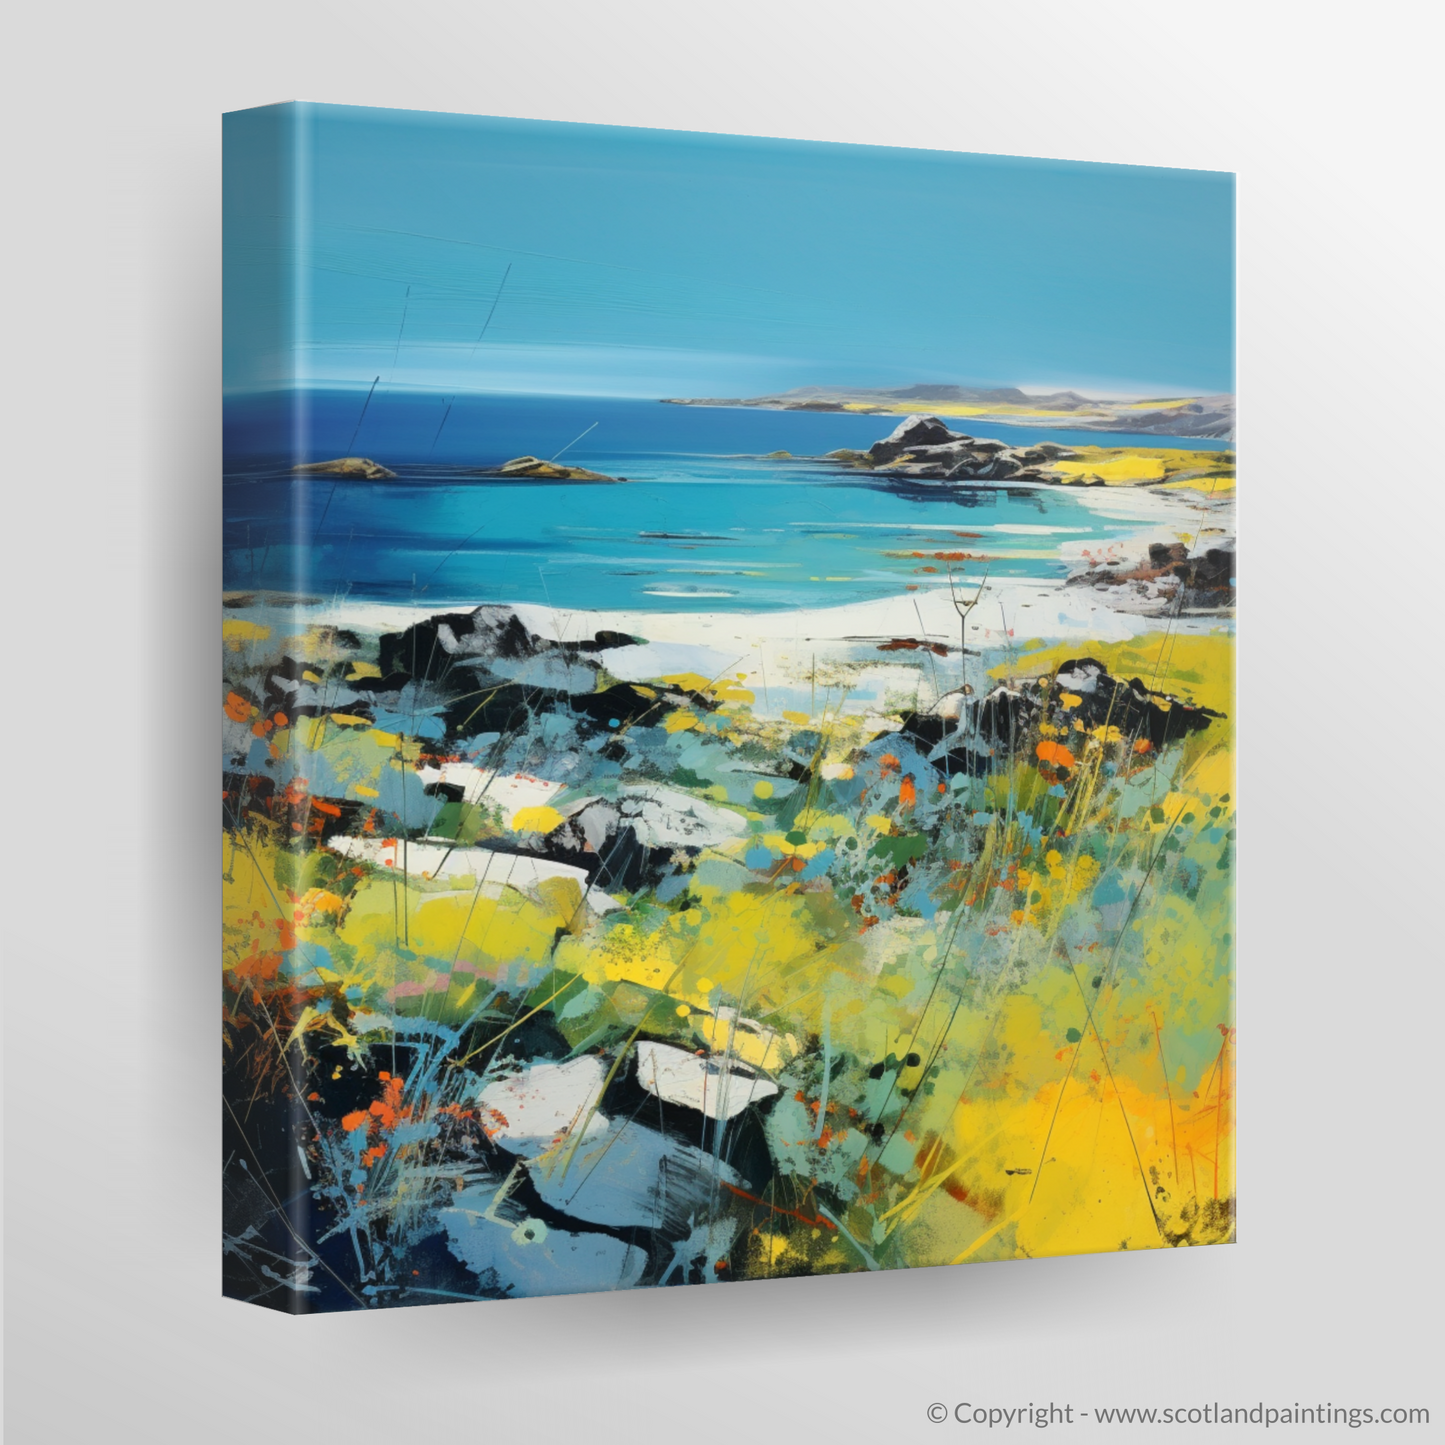 Isle of Colonsay Abstraction: A Scottish Summer Reverie